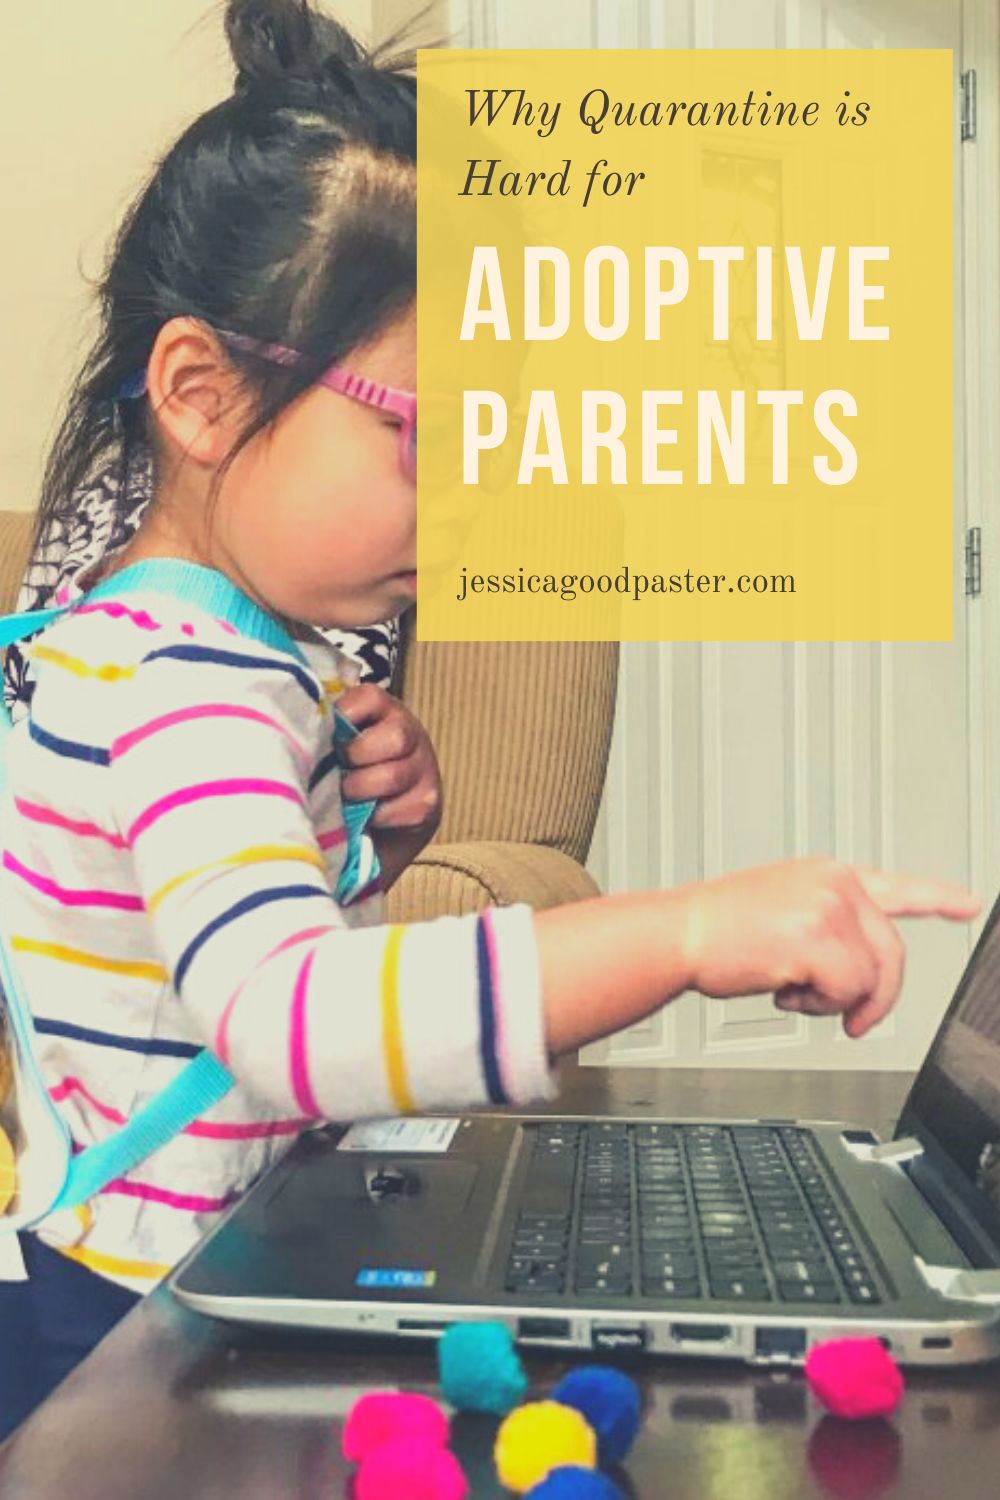 Social distancing is tough on all parents, but keeping kids from hard places, adoption, and special needs at home has extra challenges. Moms struggling with teletherapy, NTI preschool, IEPs, and trauma for their kids will feel seen by this story. #specialneeds #parenting #adoption #quarantinelife